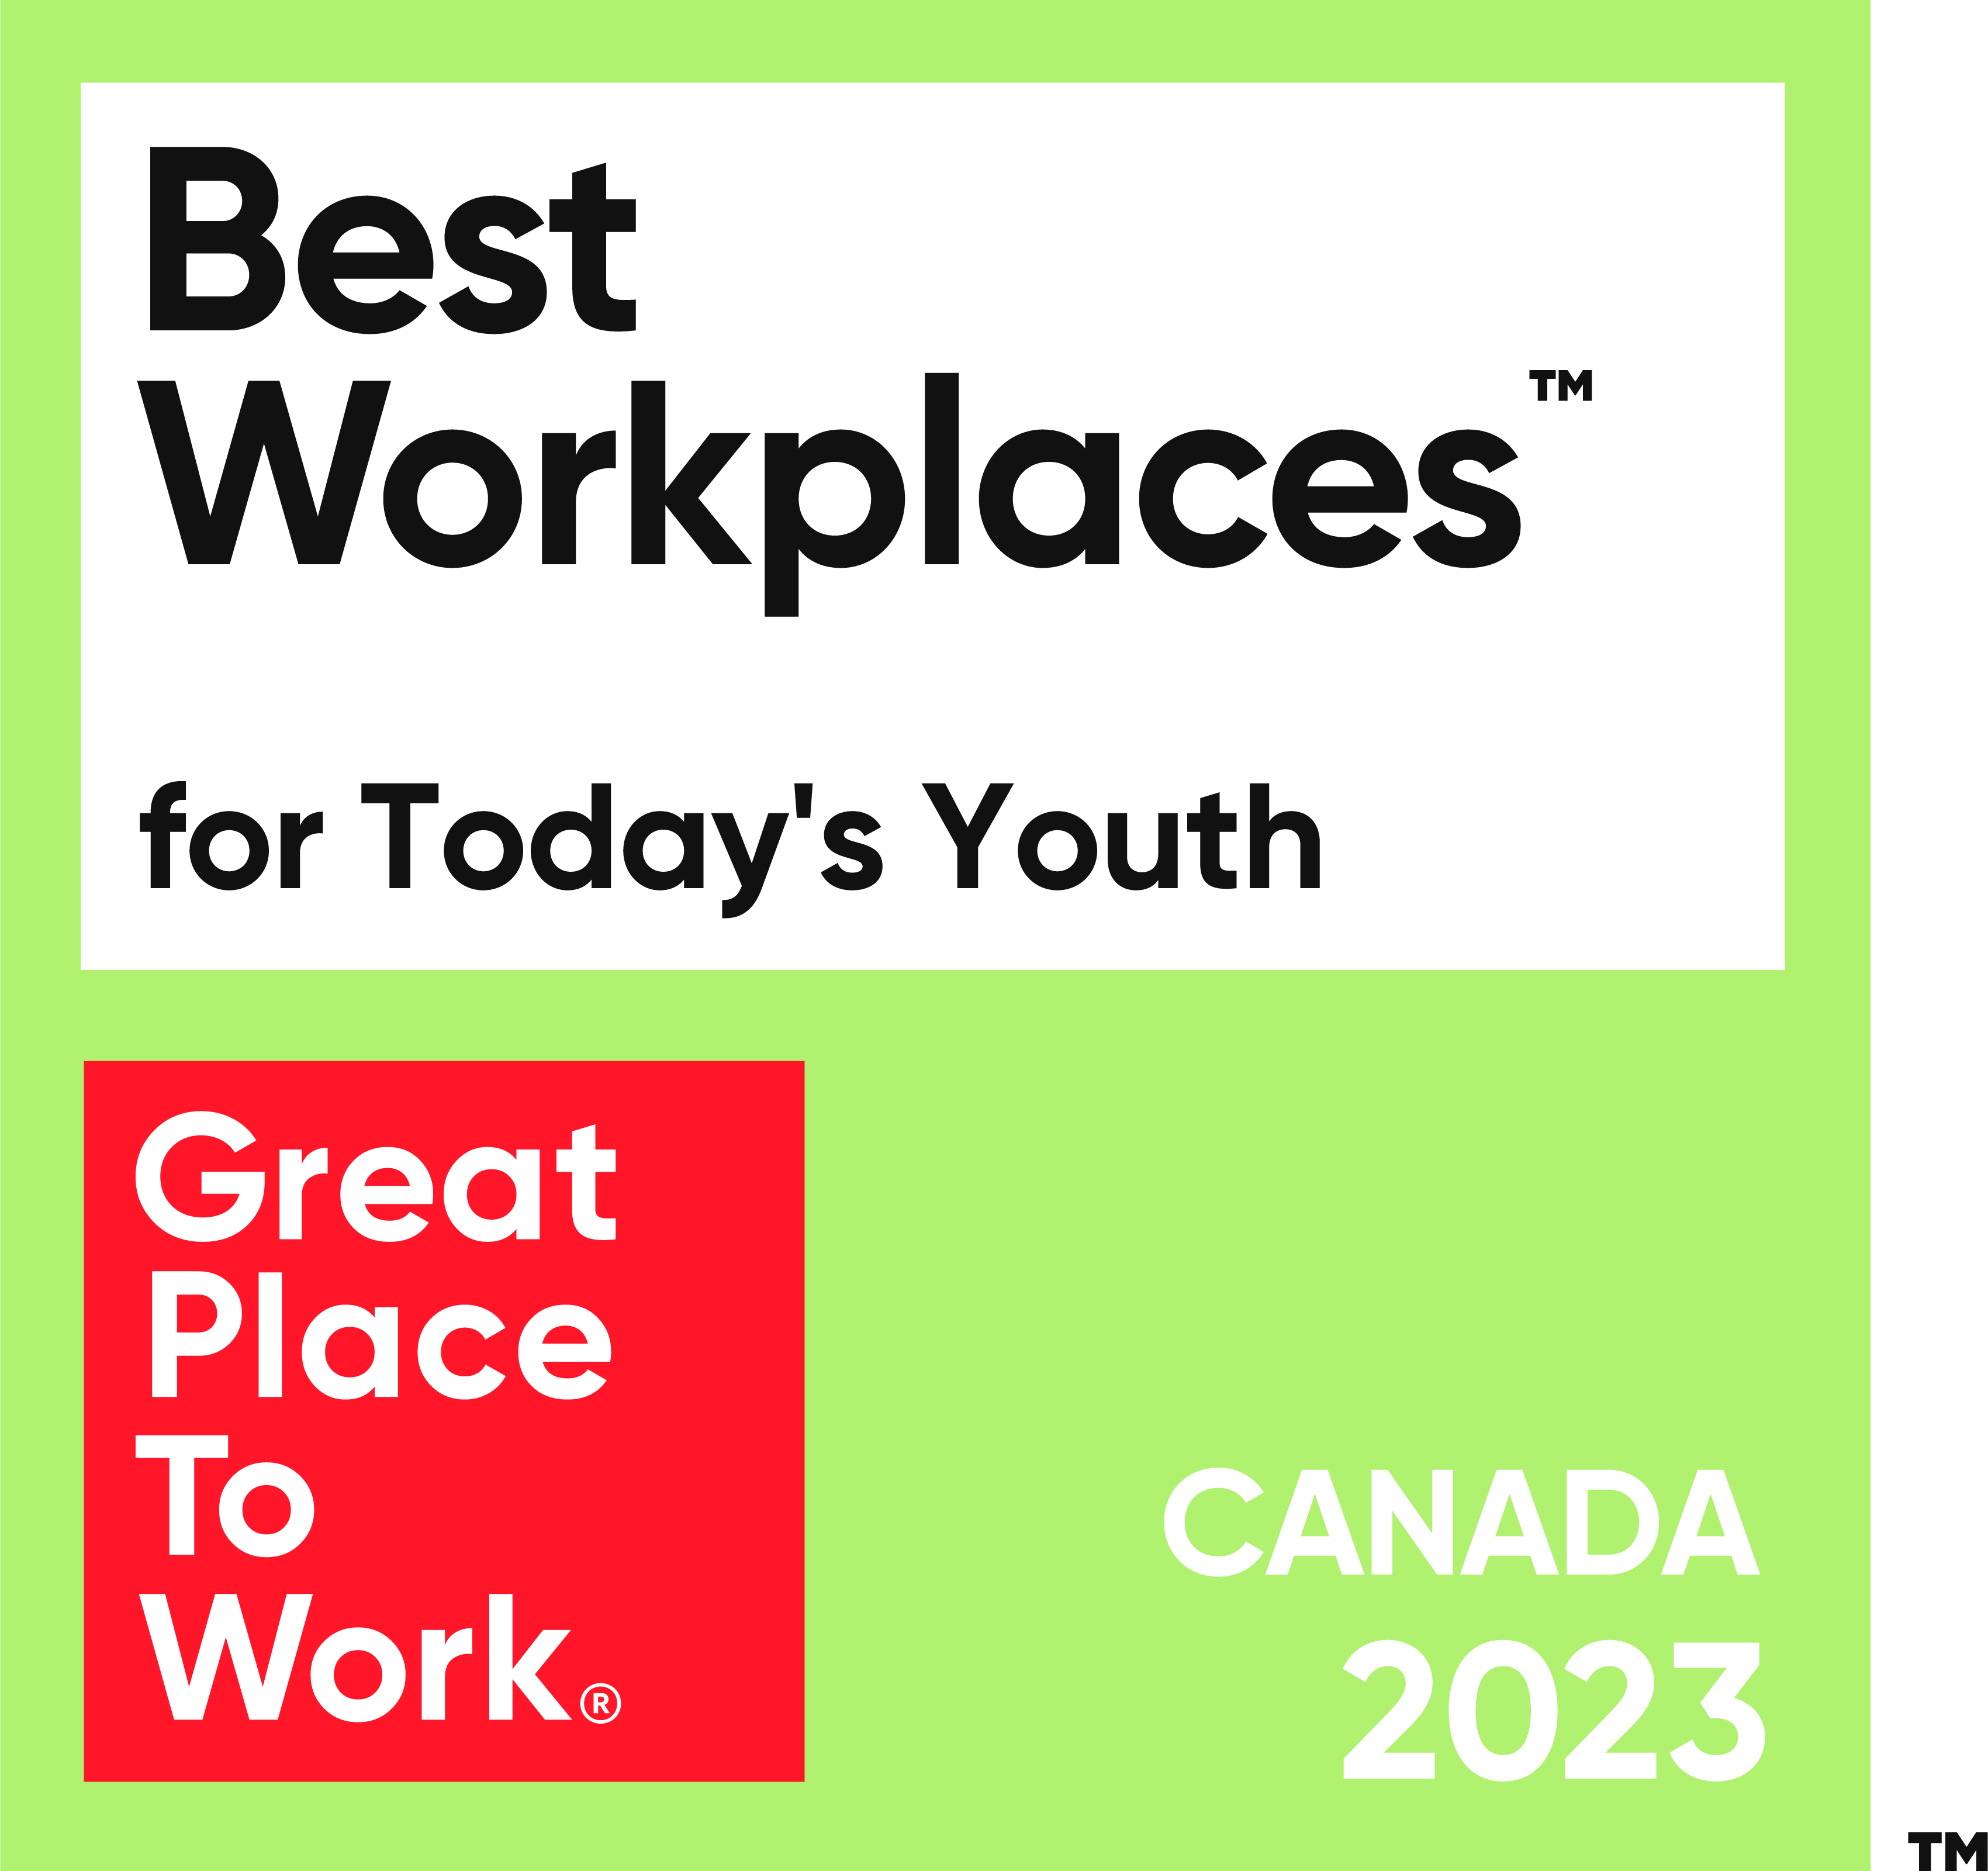 Best Workplaces for Today's Youth - Canada 2023